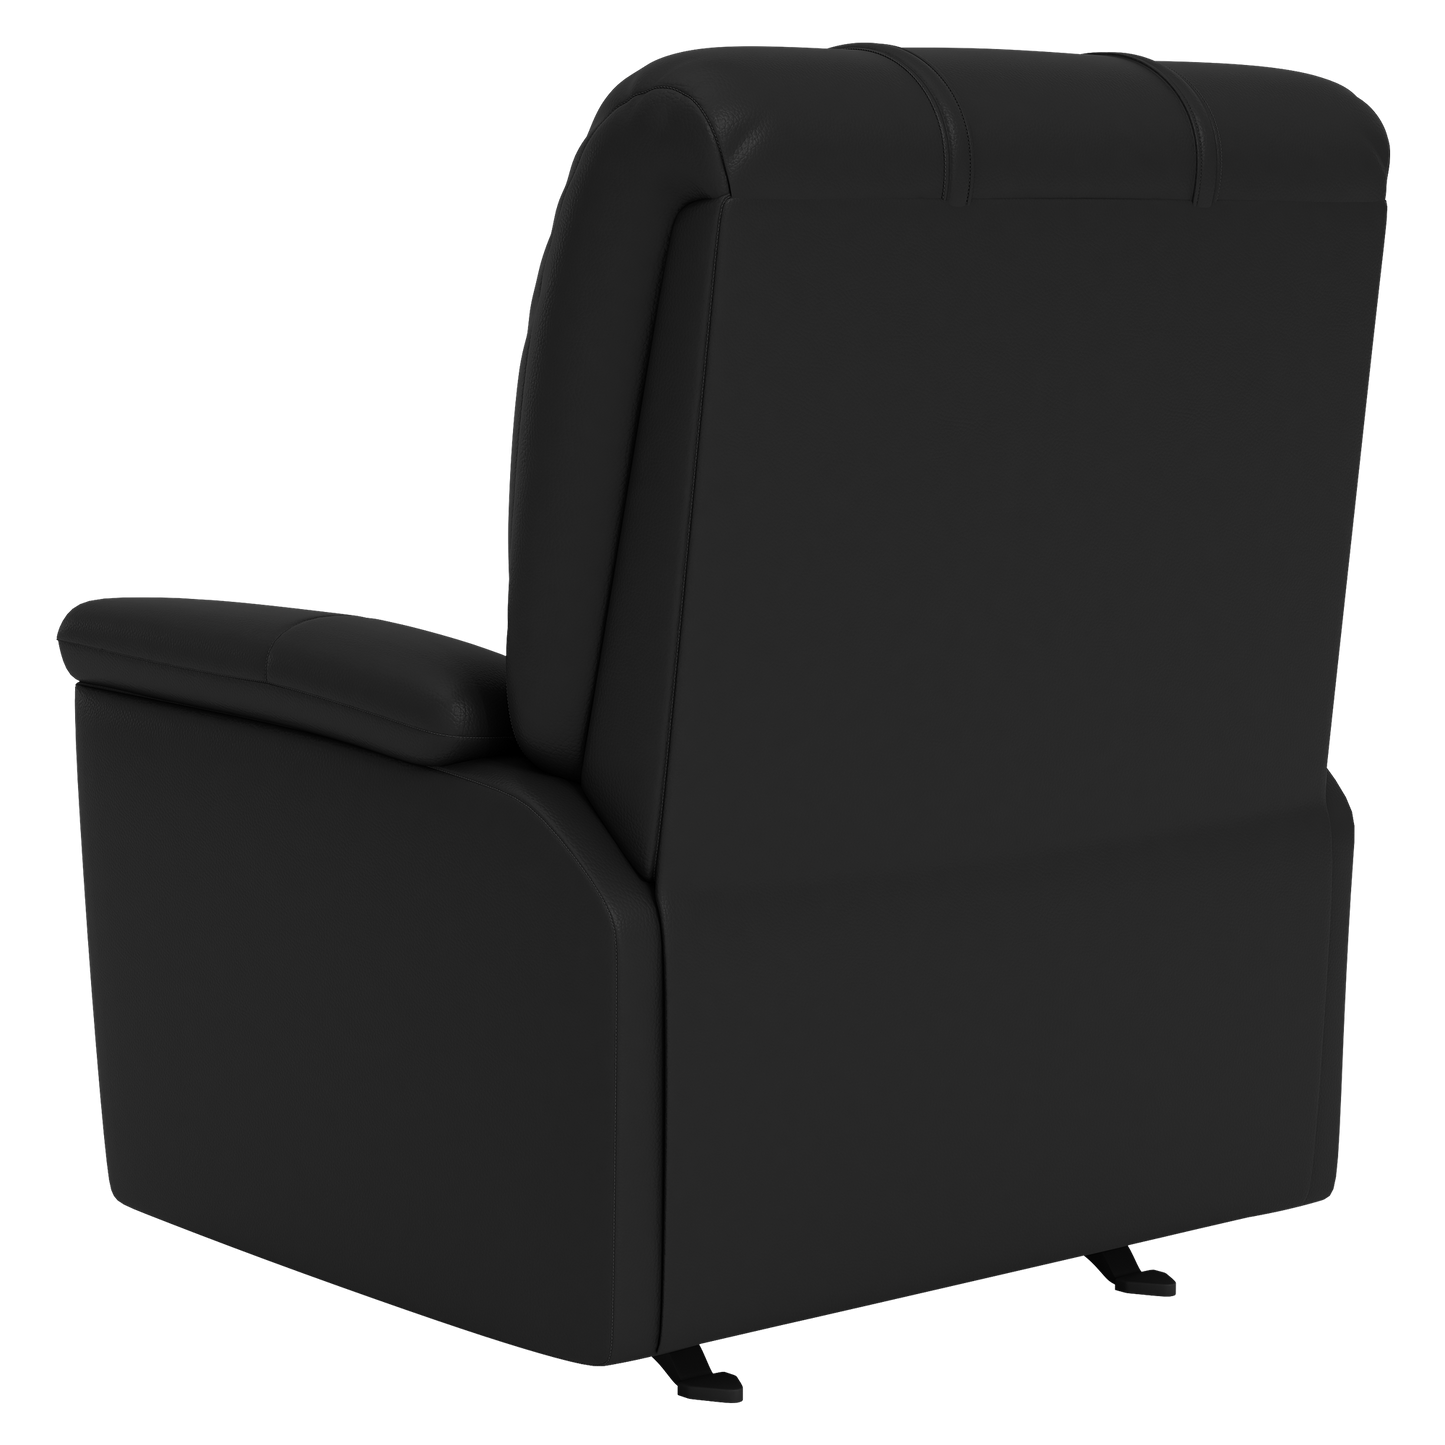 Freedom Rocker Recliner with Brooklyn Nets Secondary